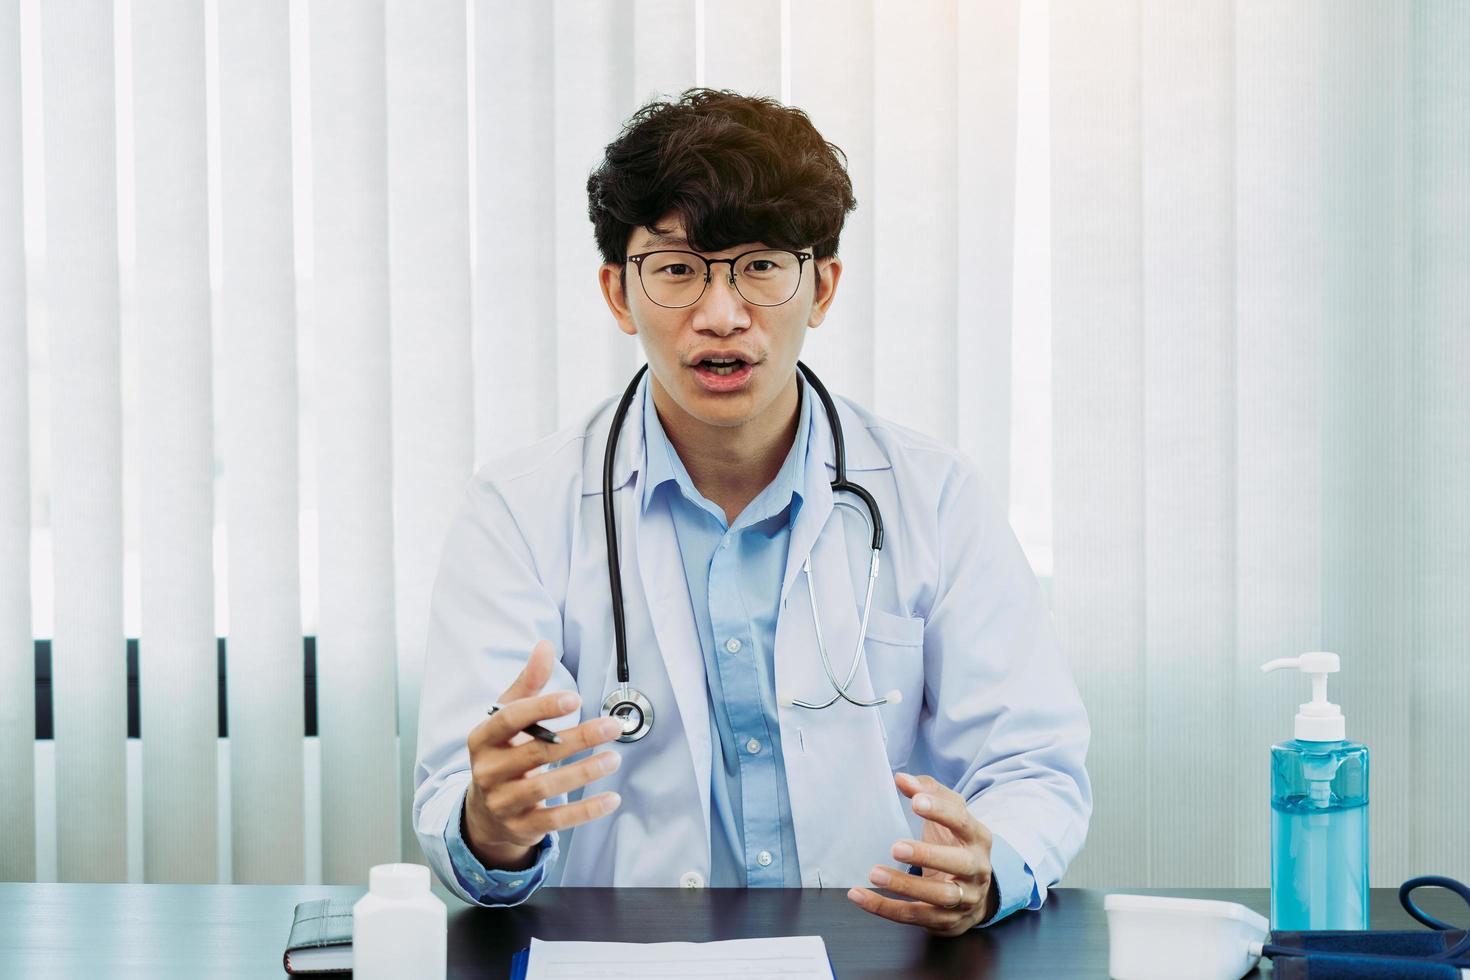 Asian doctor wearing glasses and white uniforms with a stethoscope provides online counseling to patients during the virus outbreak keeping a social distance. photo